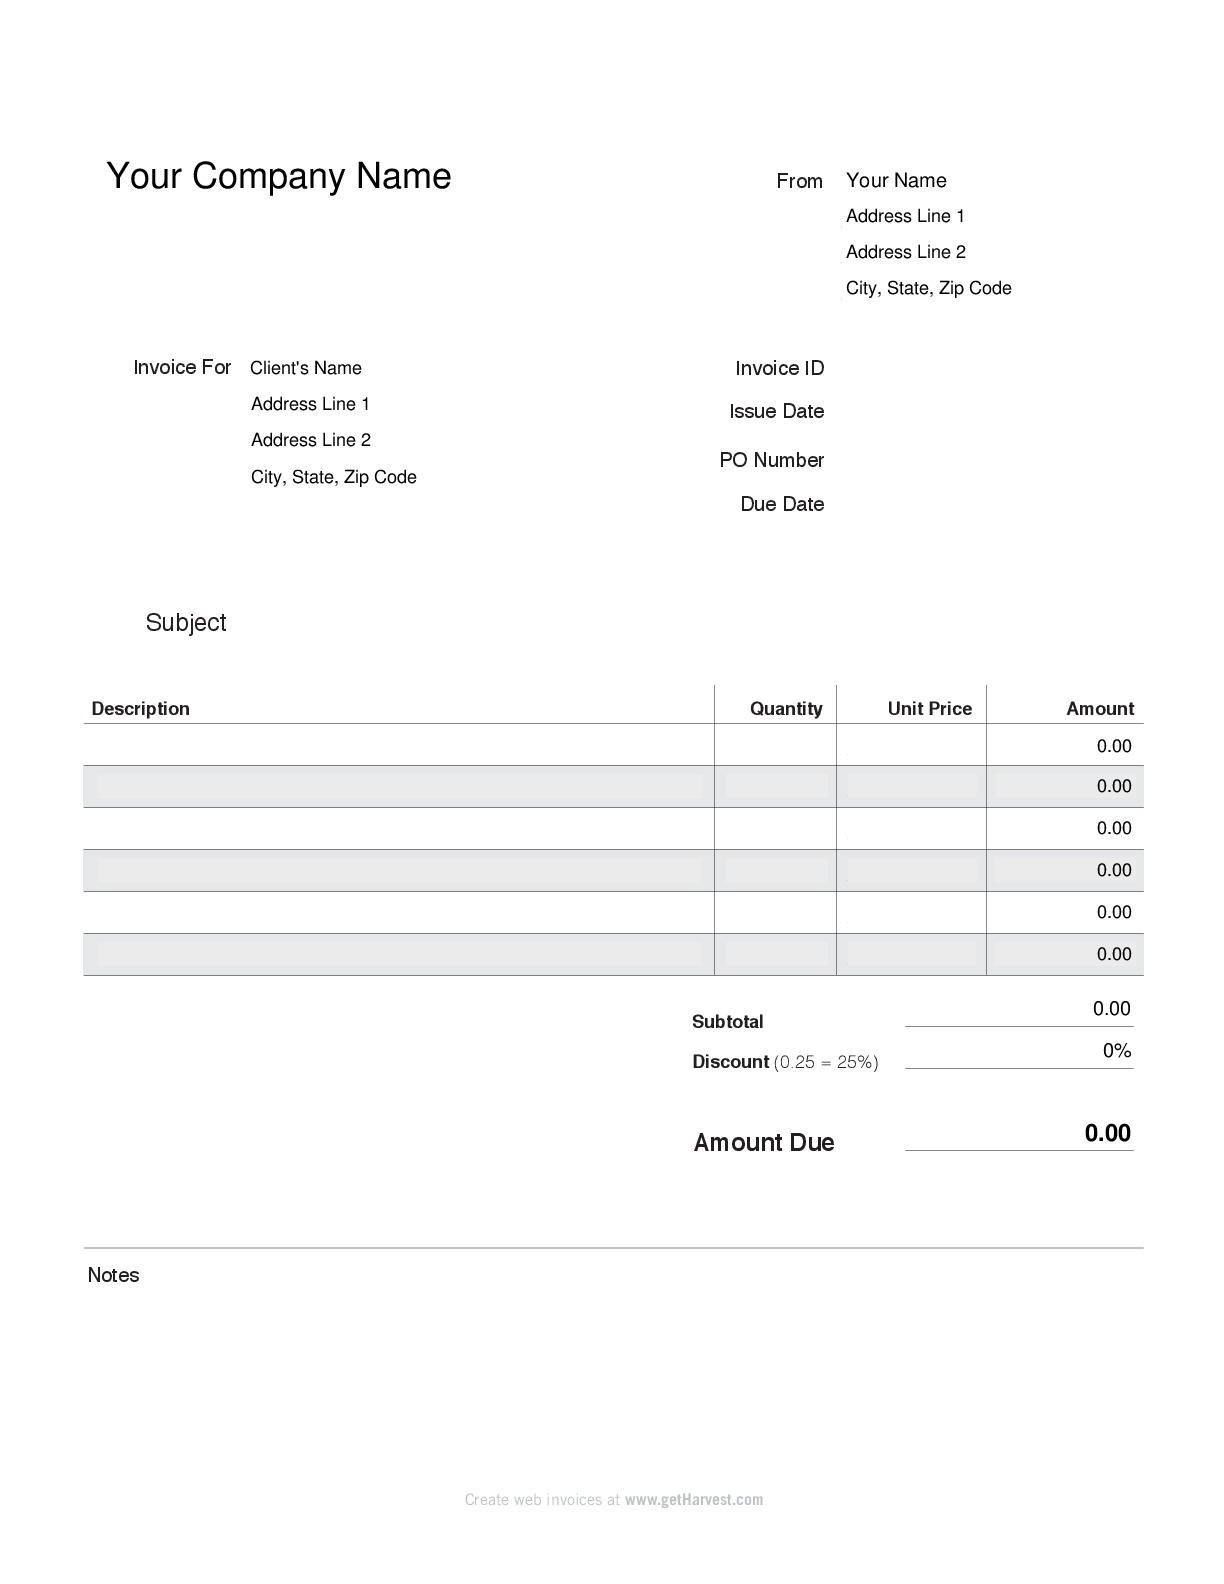 PDF invoice converted to image